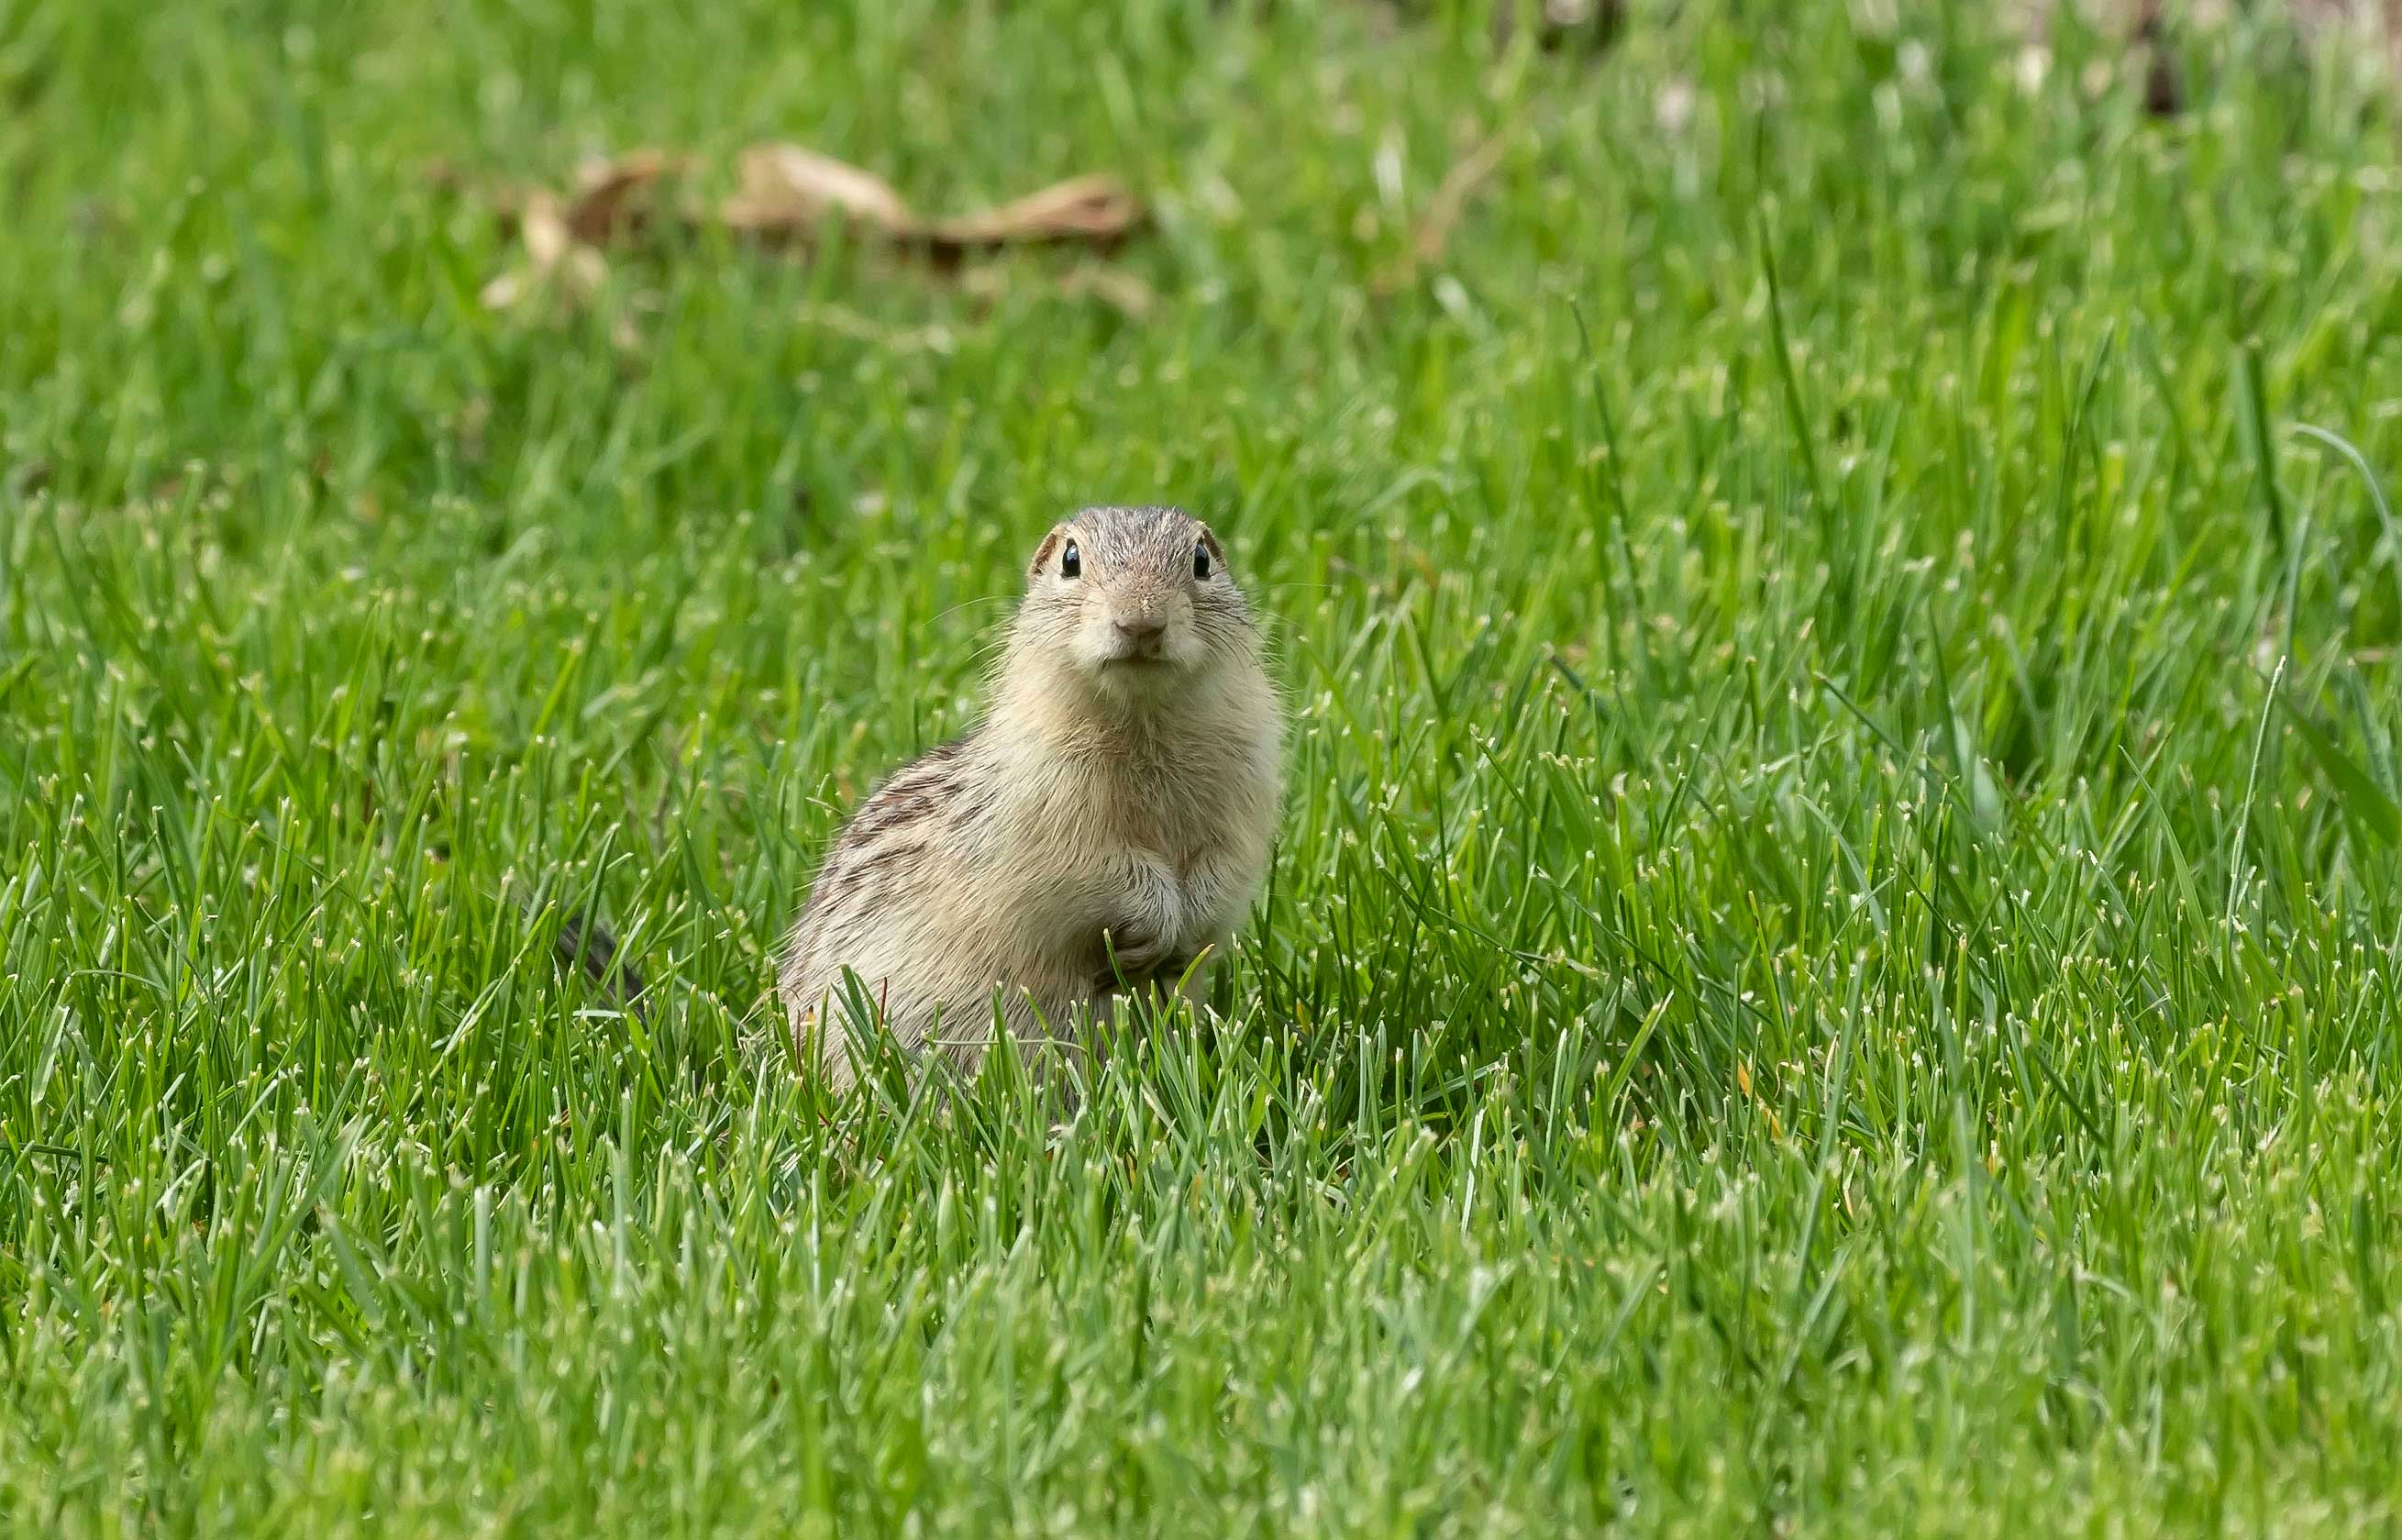 A ground squirrel in the grass.